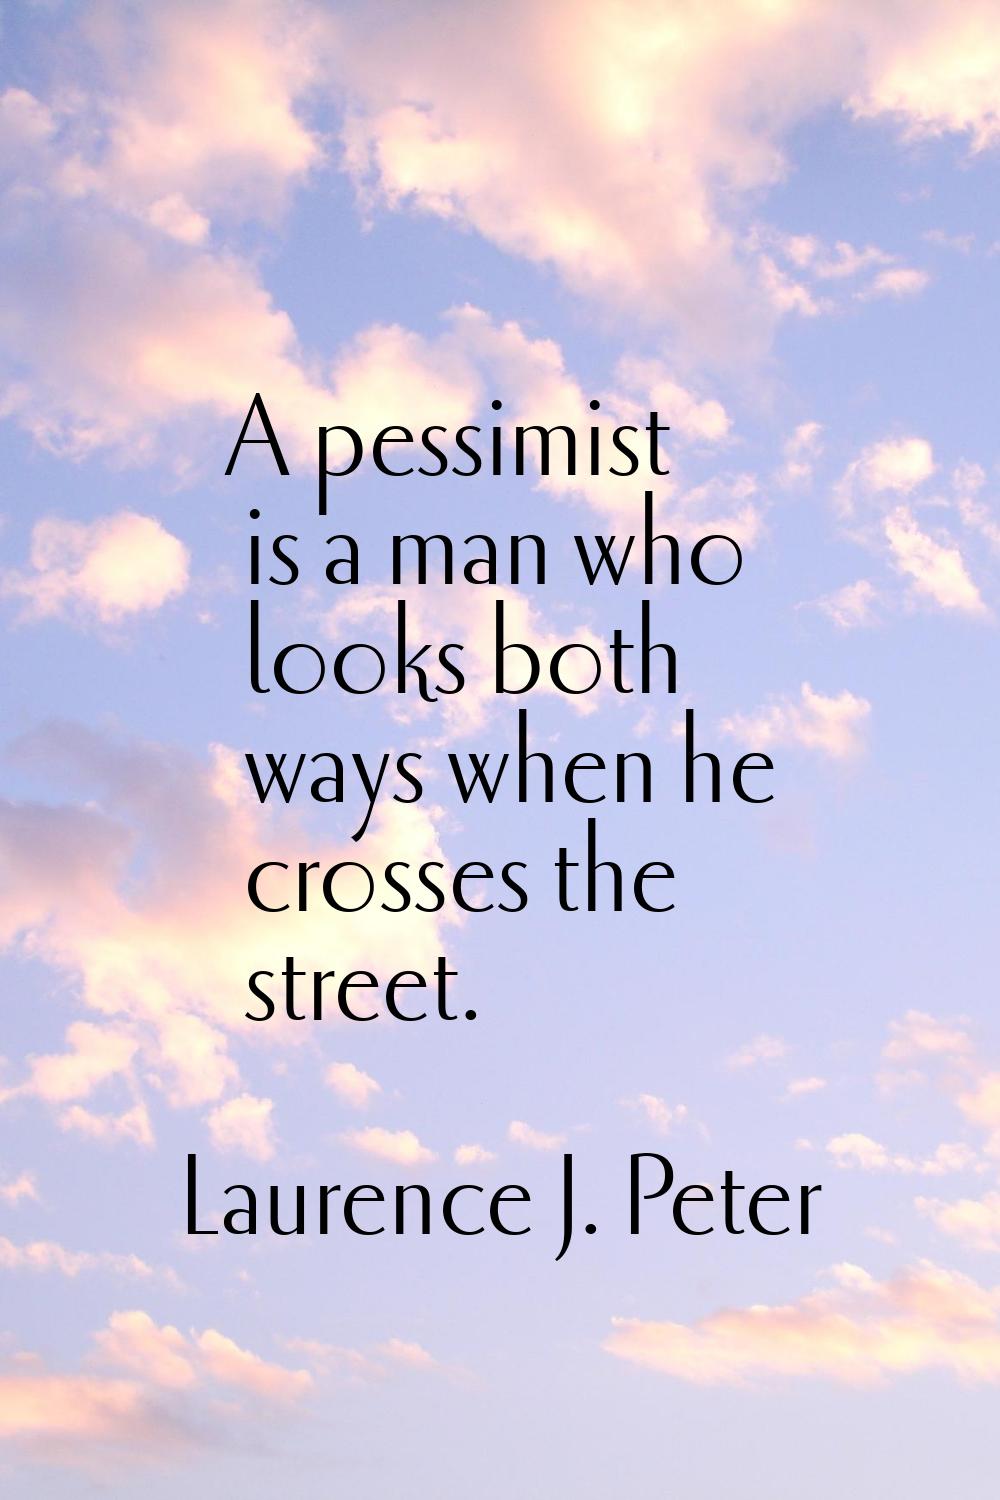 A pessimist is a man who looks both ways when he crosses the street.